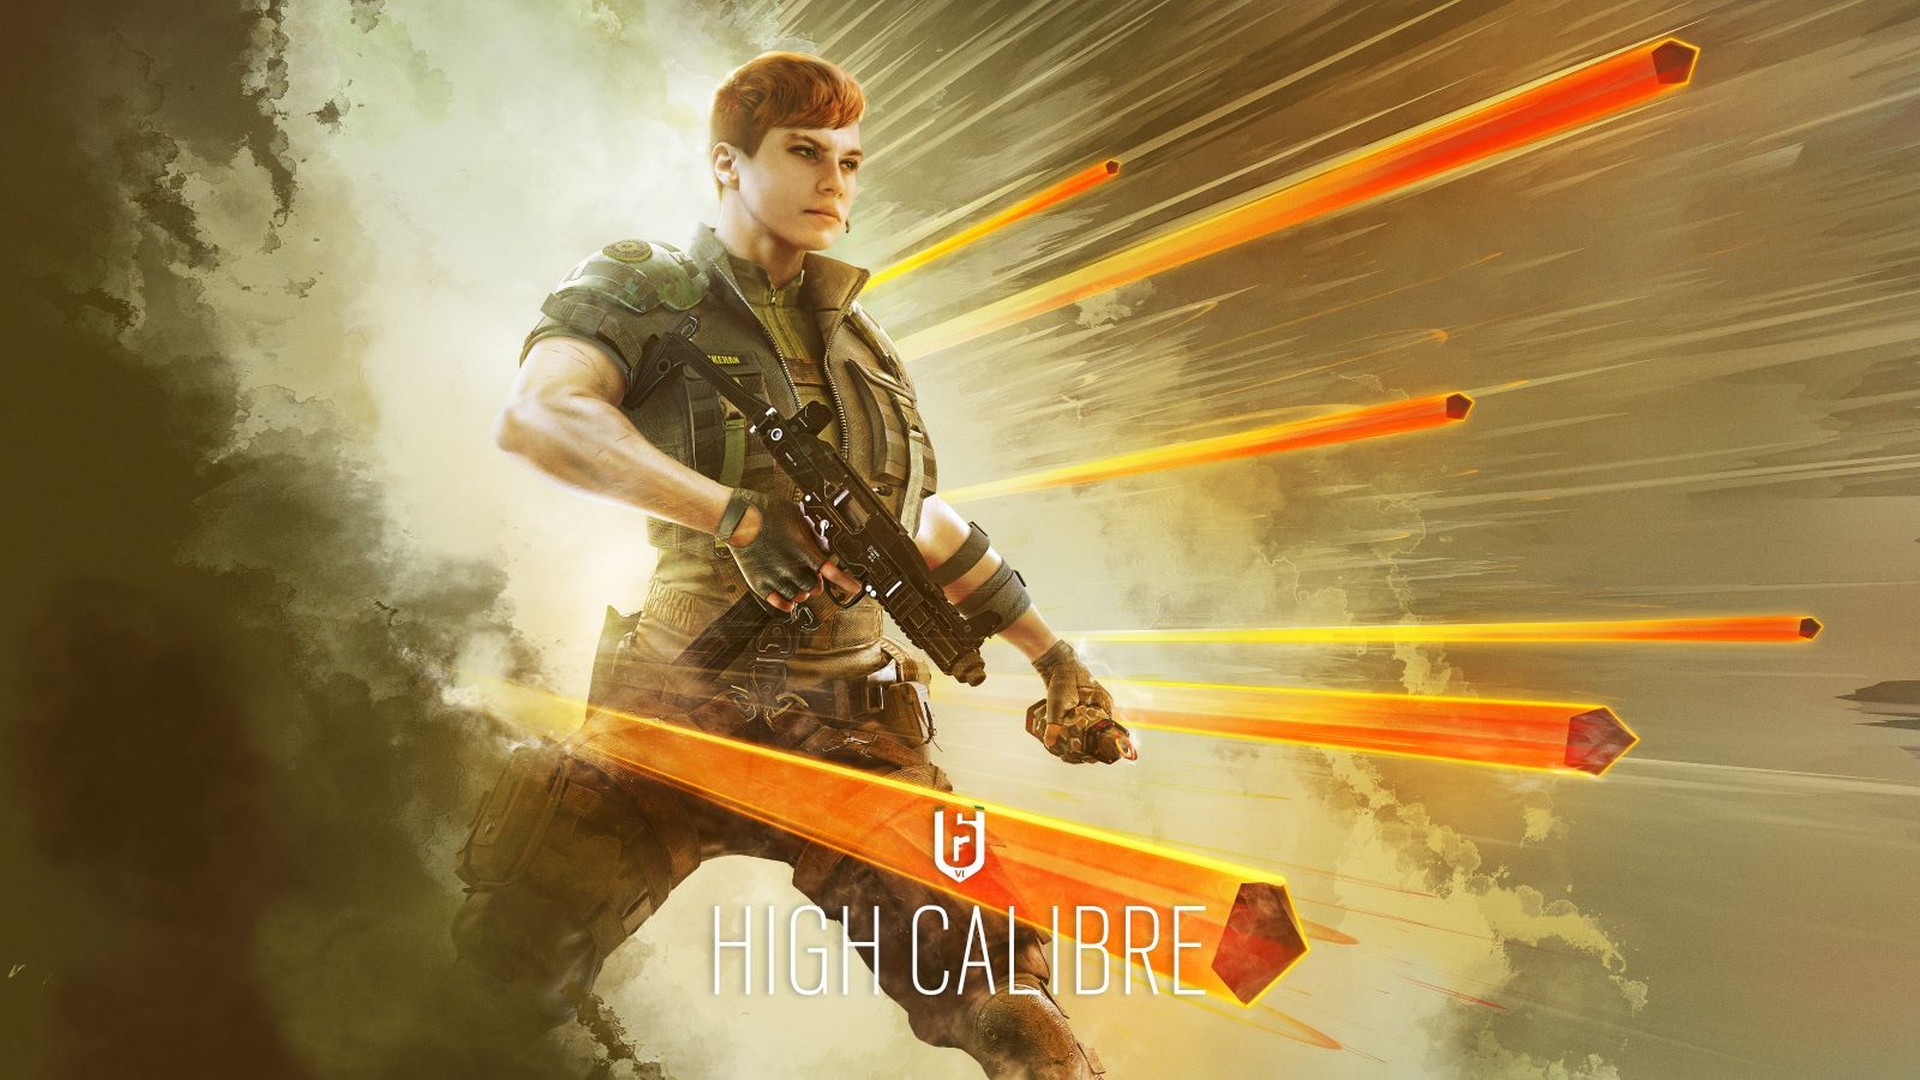 High Calibre Launches Today in Tom Clancy’s Rainbow Six Siege